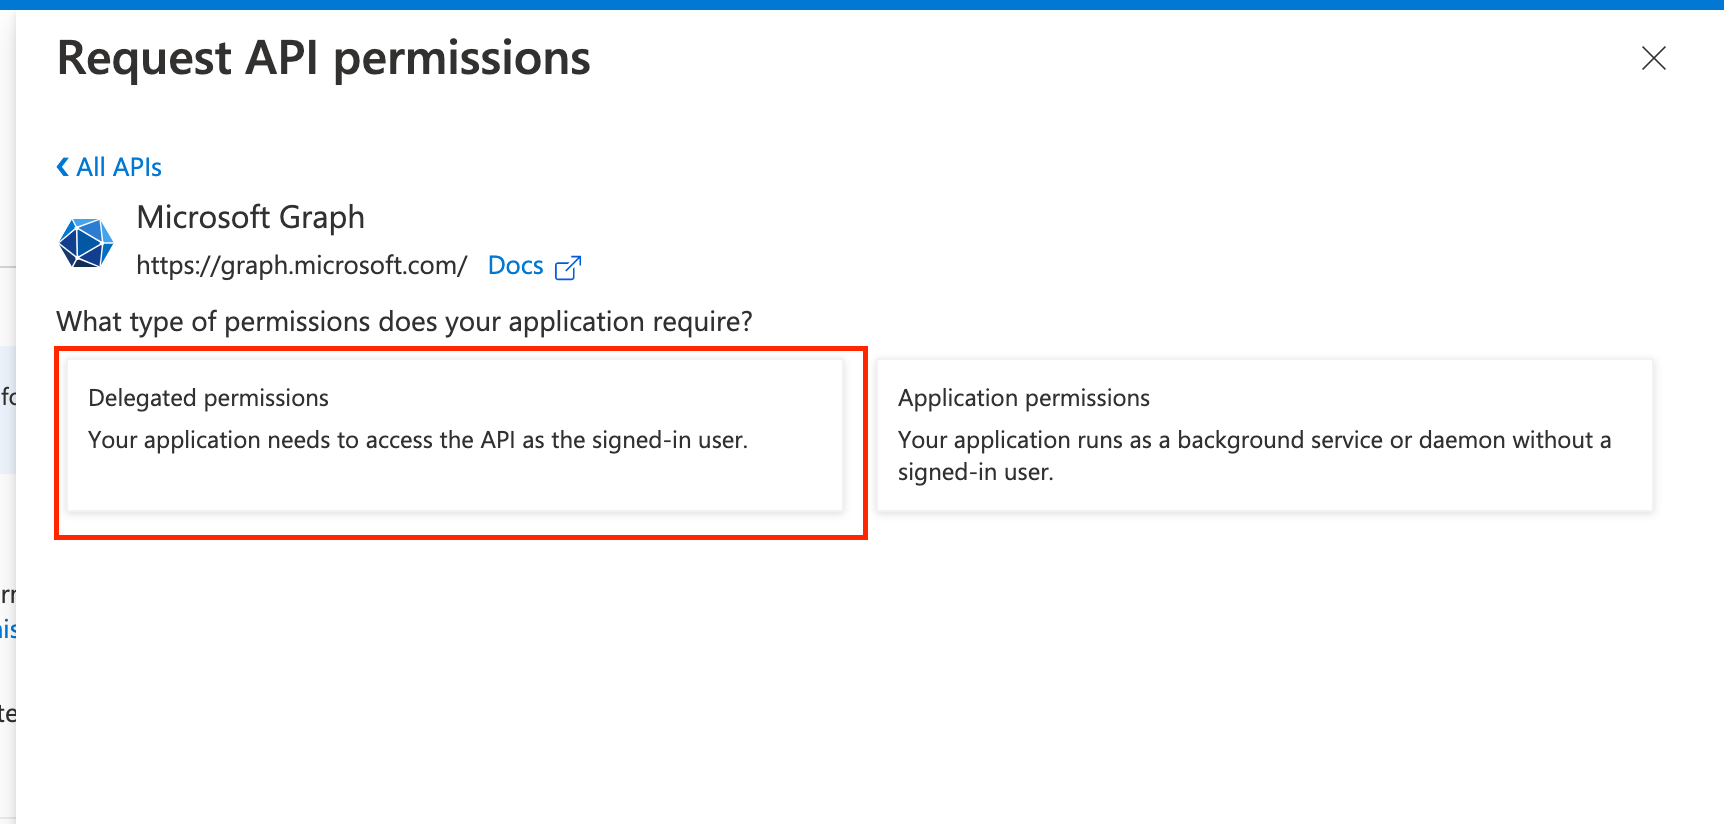 Setting up OAuth2 with Outlook